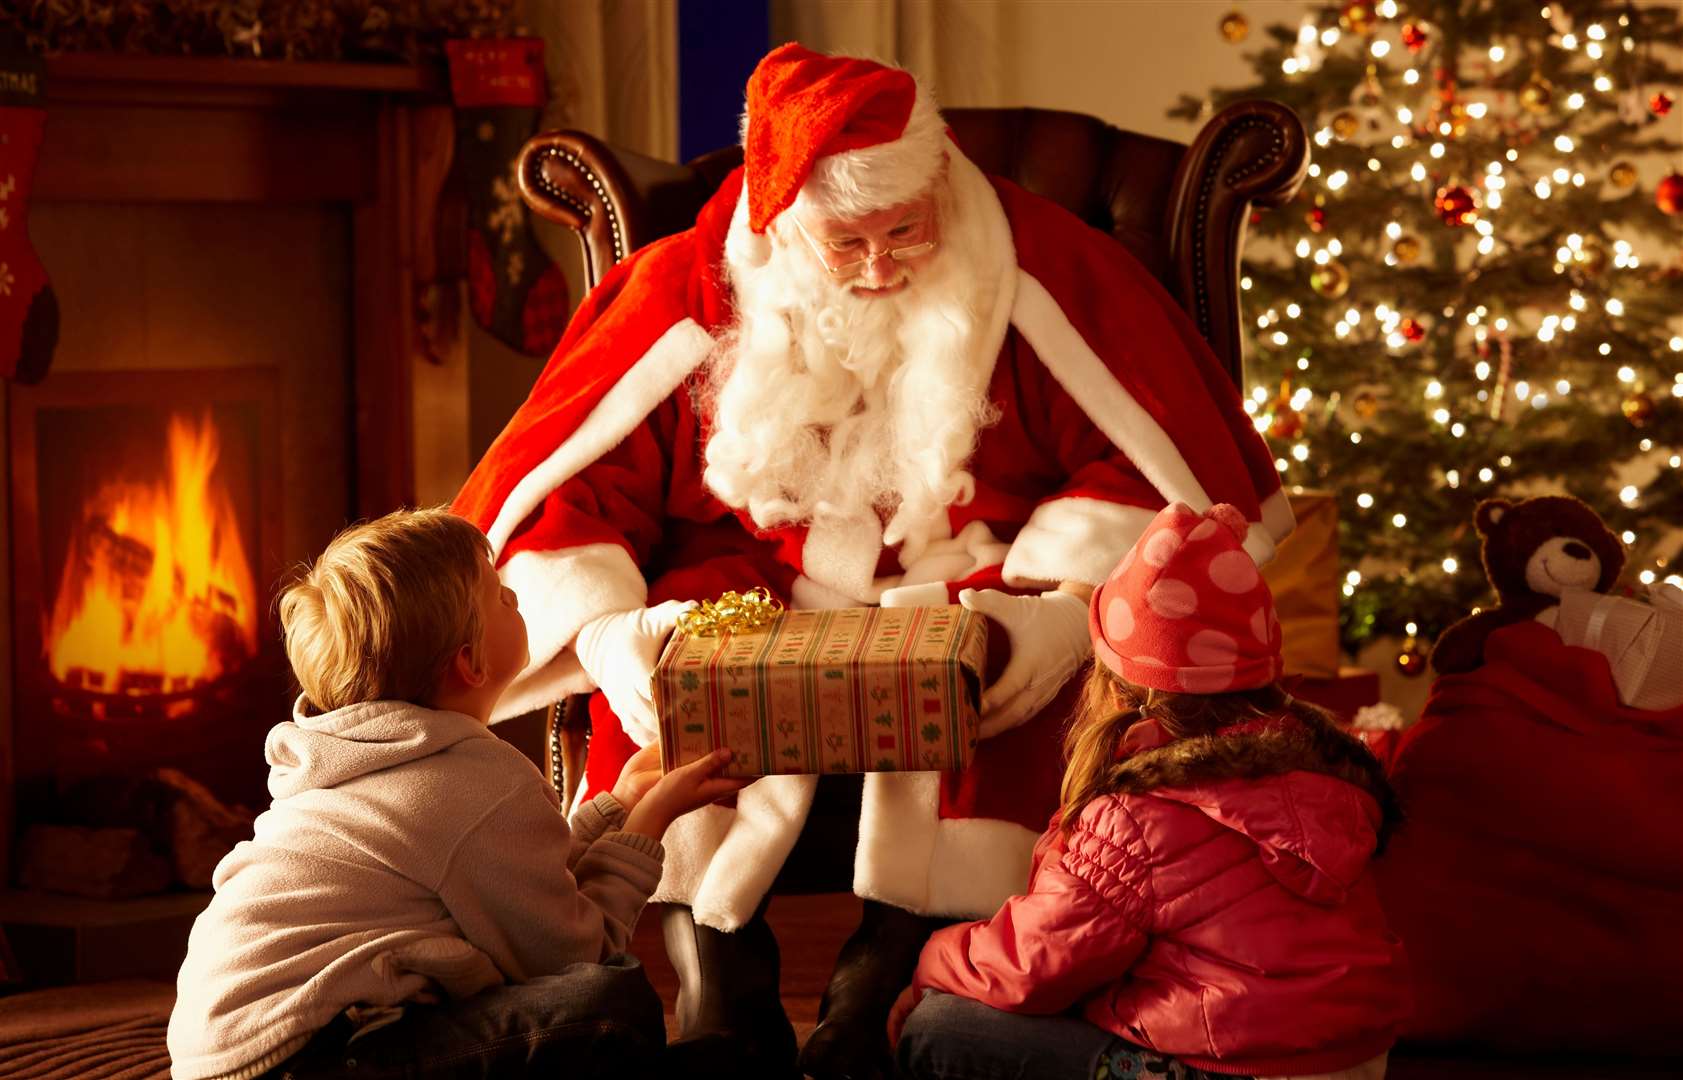 Children are eagerly awaiting the arrival of Father Christmas. Image: iStock.